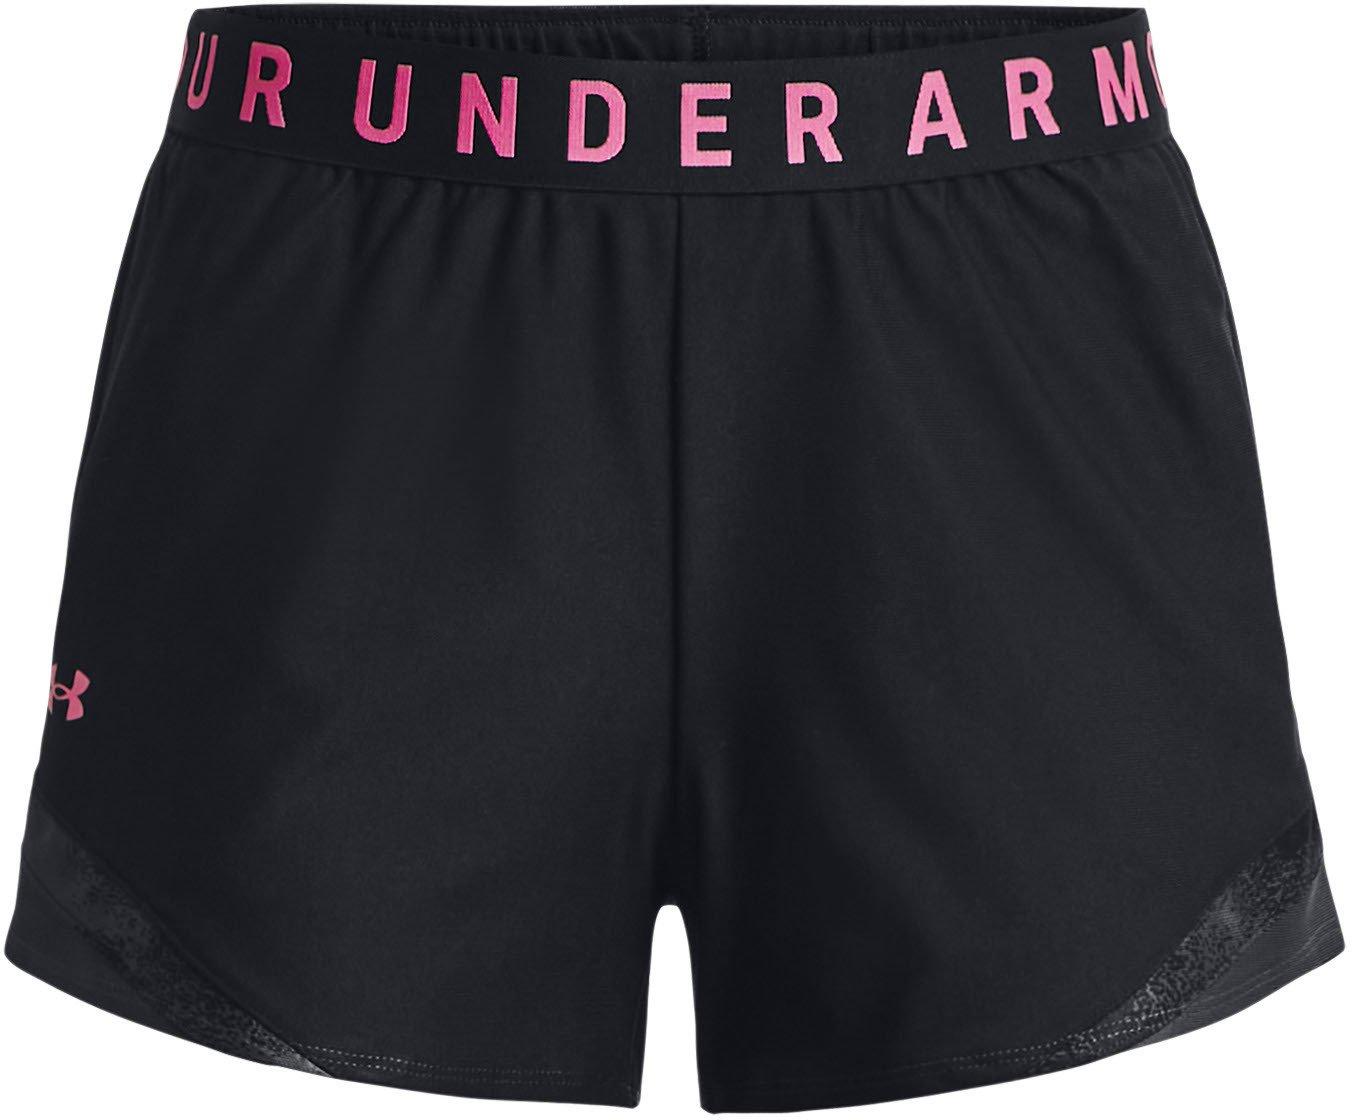 Under Armour Play Up Shorts 3.0 TriCo Nov-BLK XS